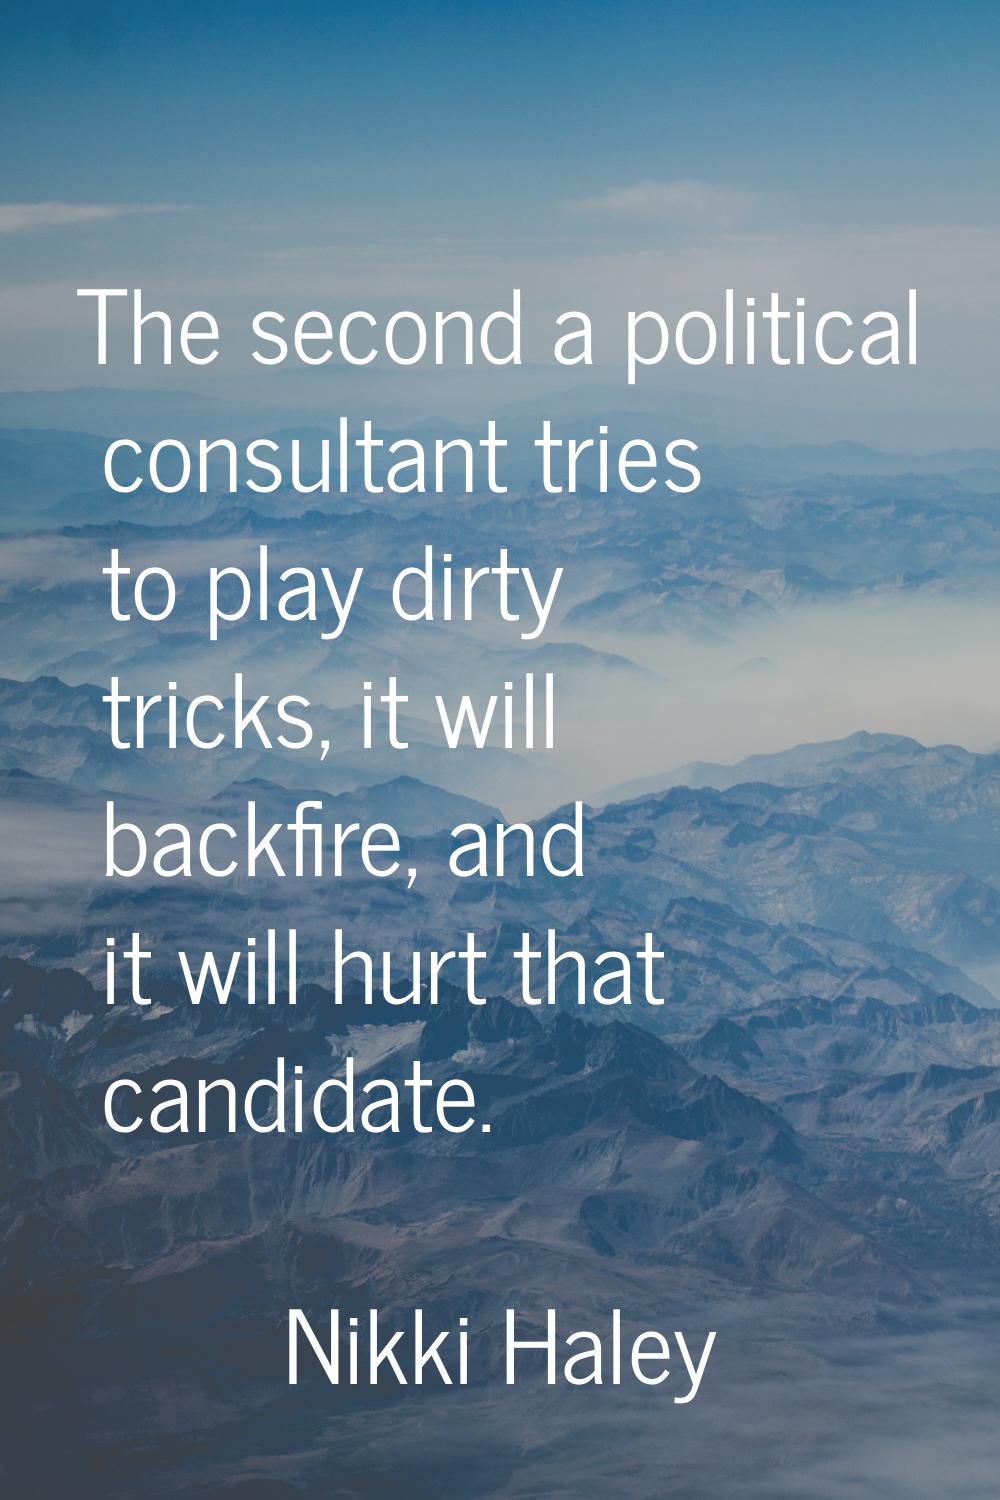 The second a political consultant tries to play dirty tricks, it will backfire, and it will hurt th